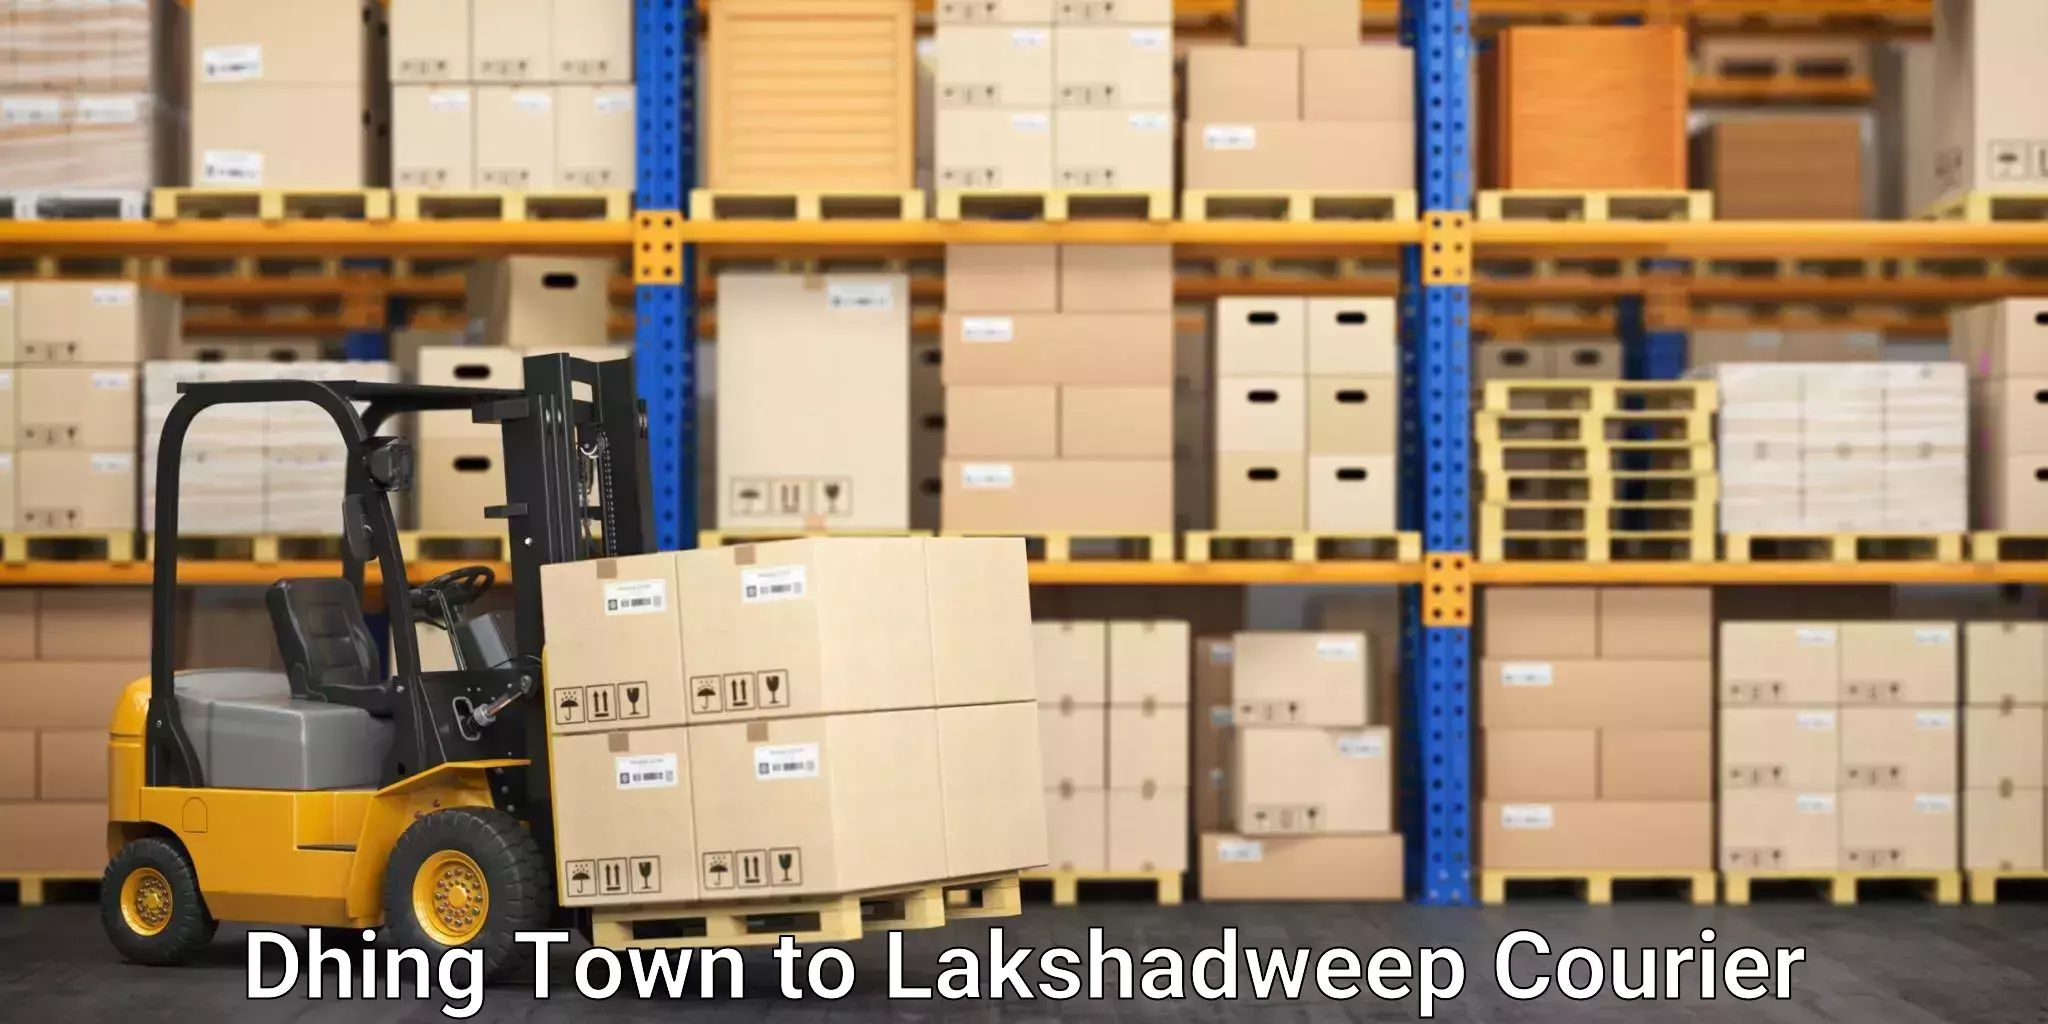 Nationwide delivery network in Dhing Town to Lakshadweep